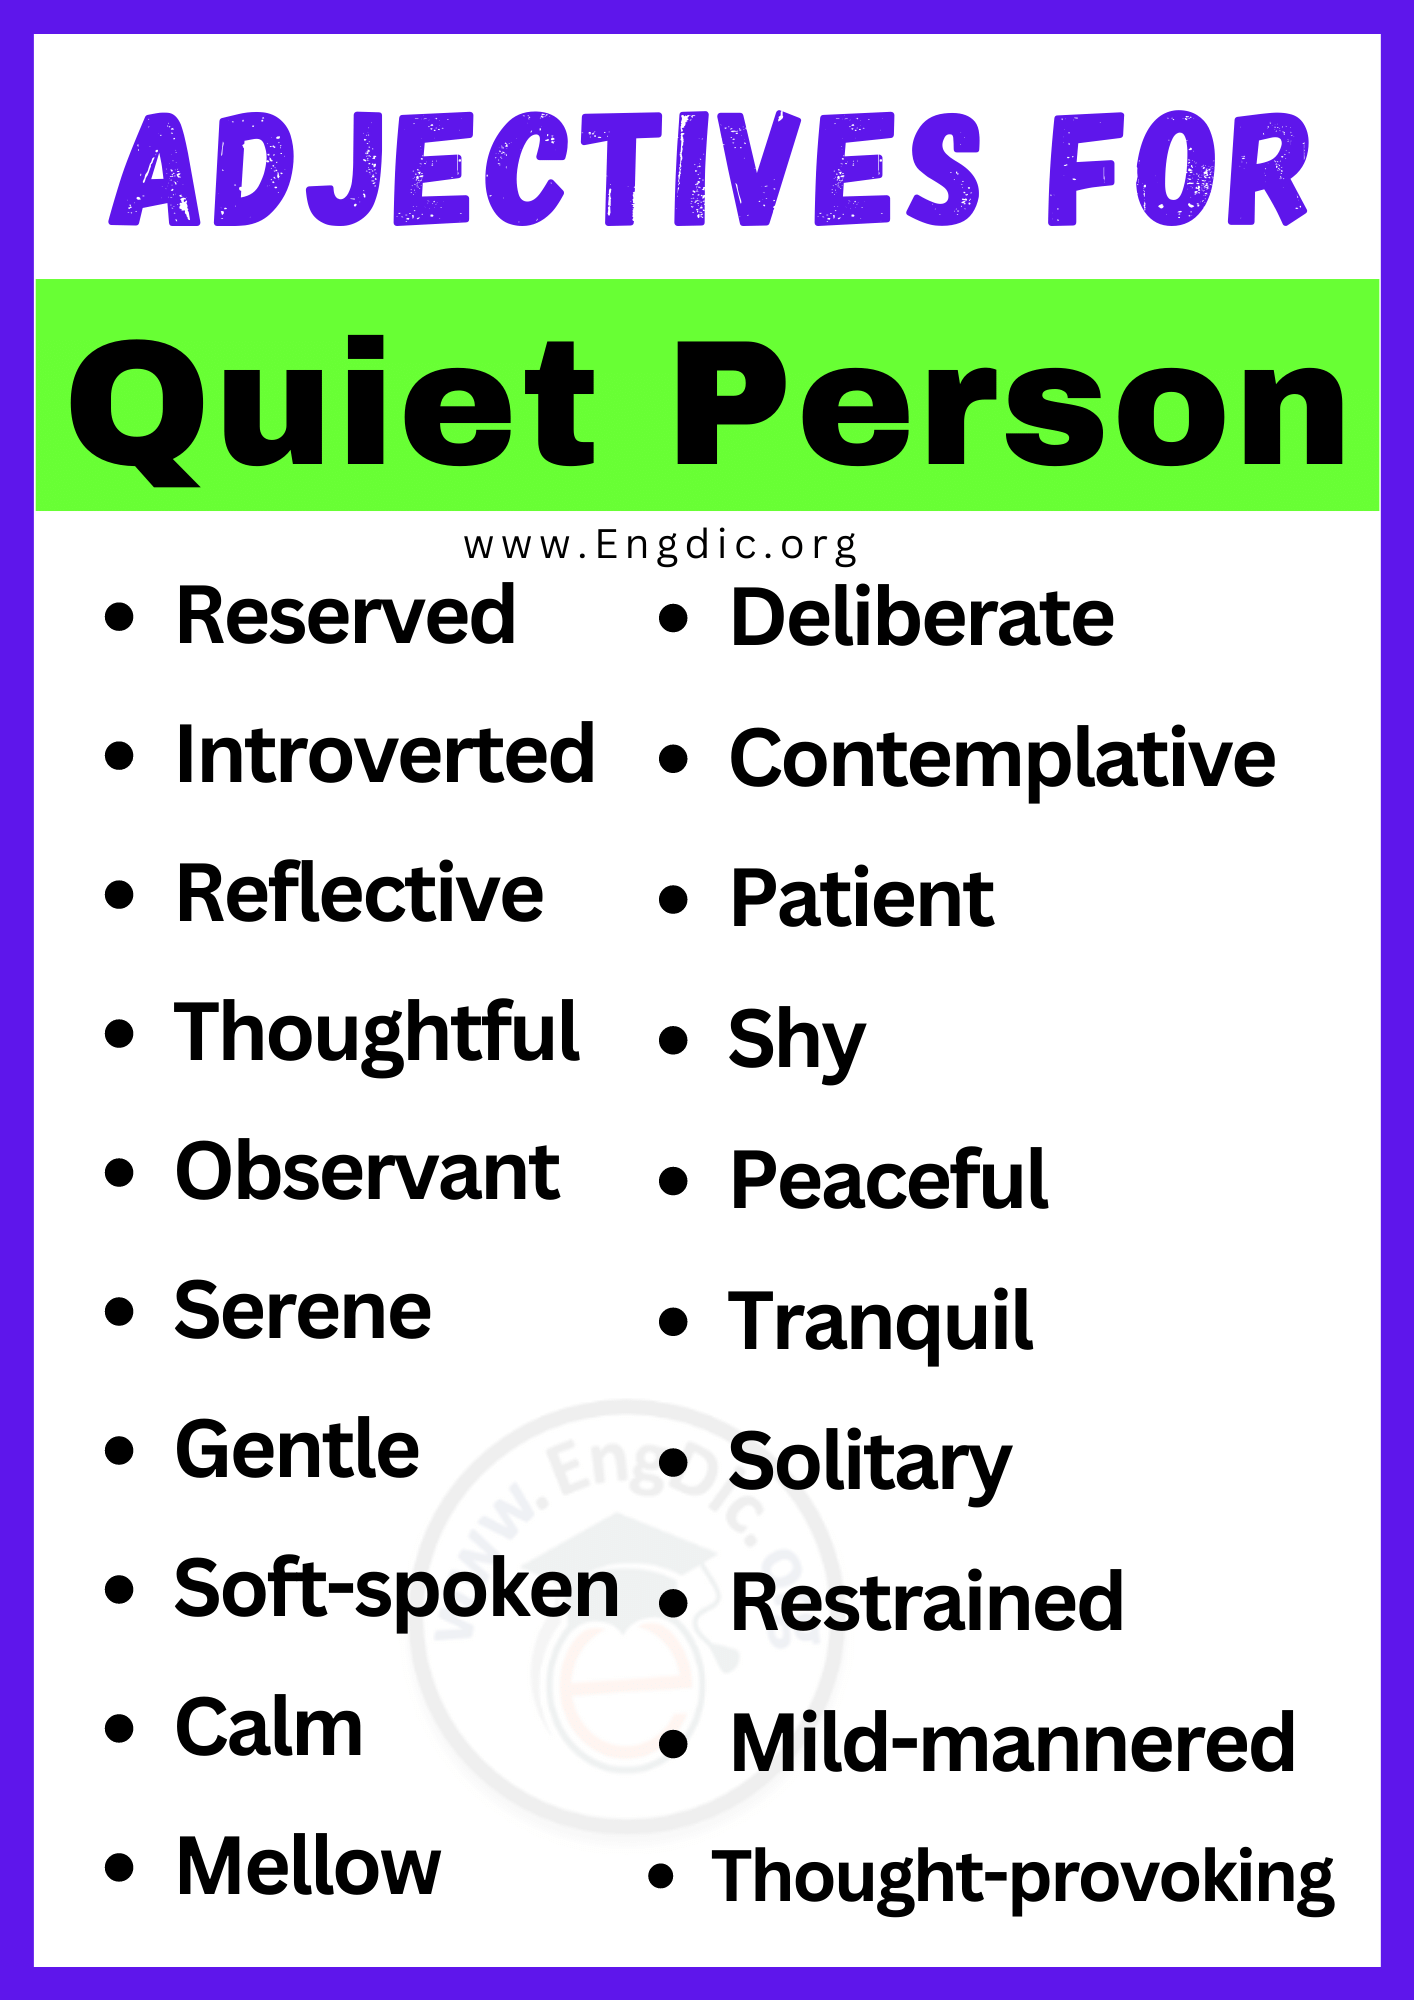 Adjectives for Quiet person